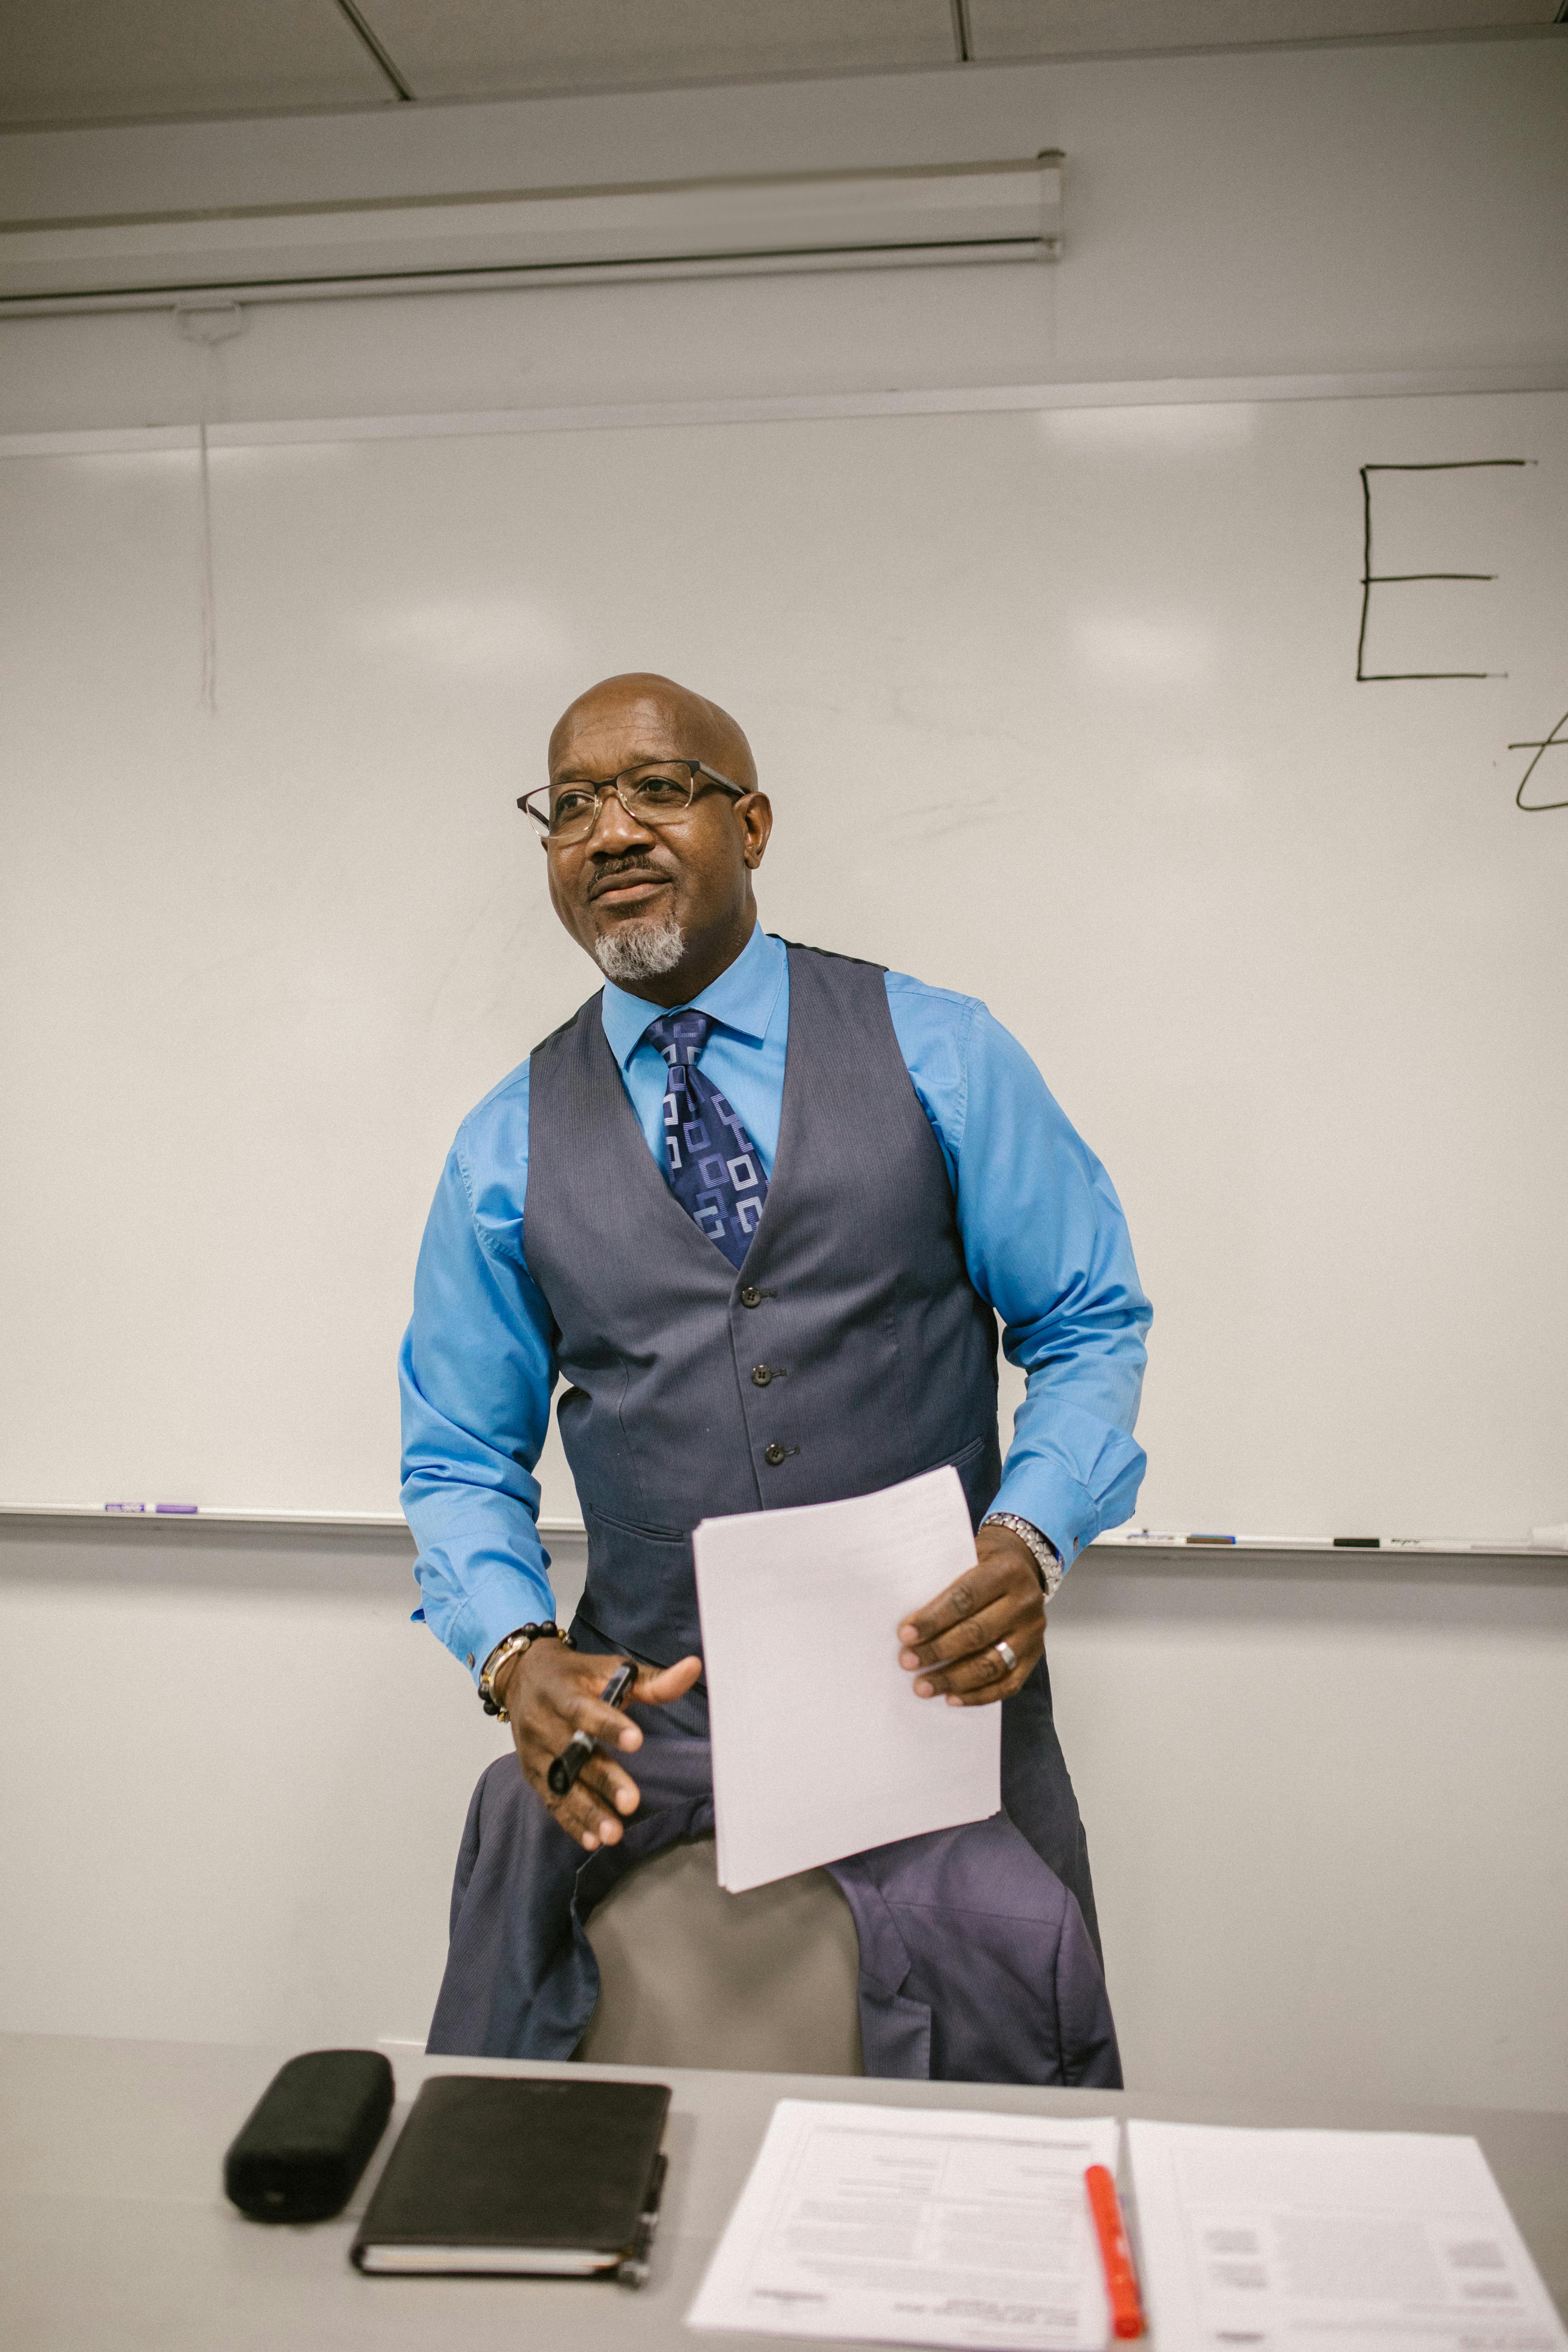 A professor stands at the front of the classroom